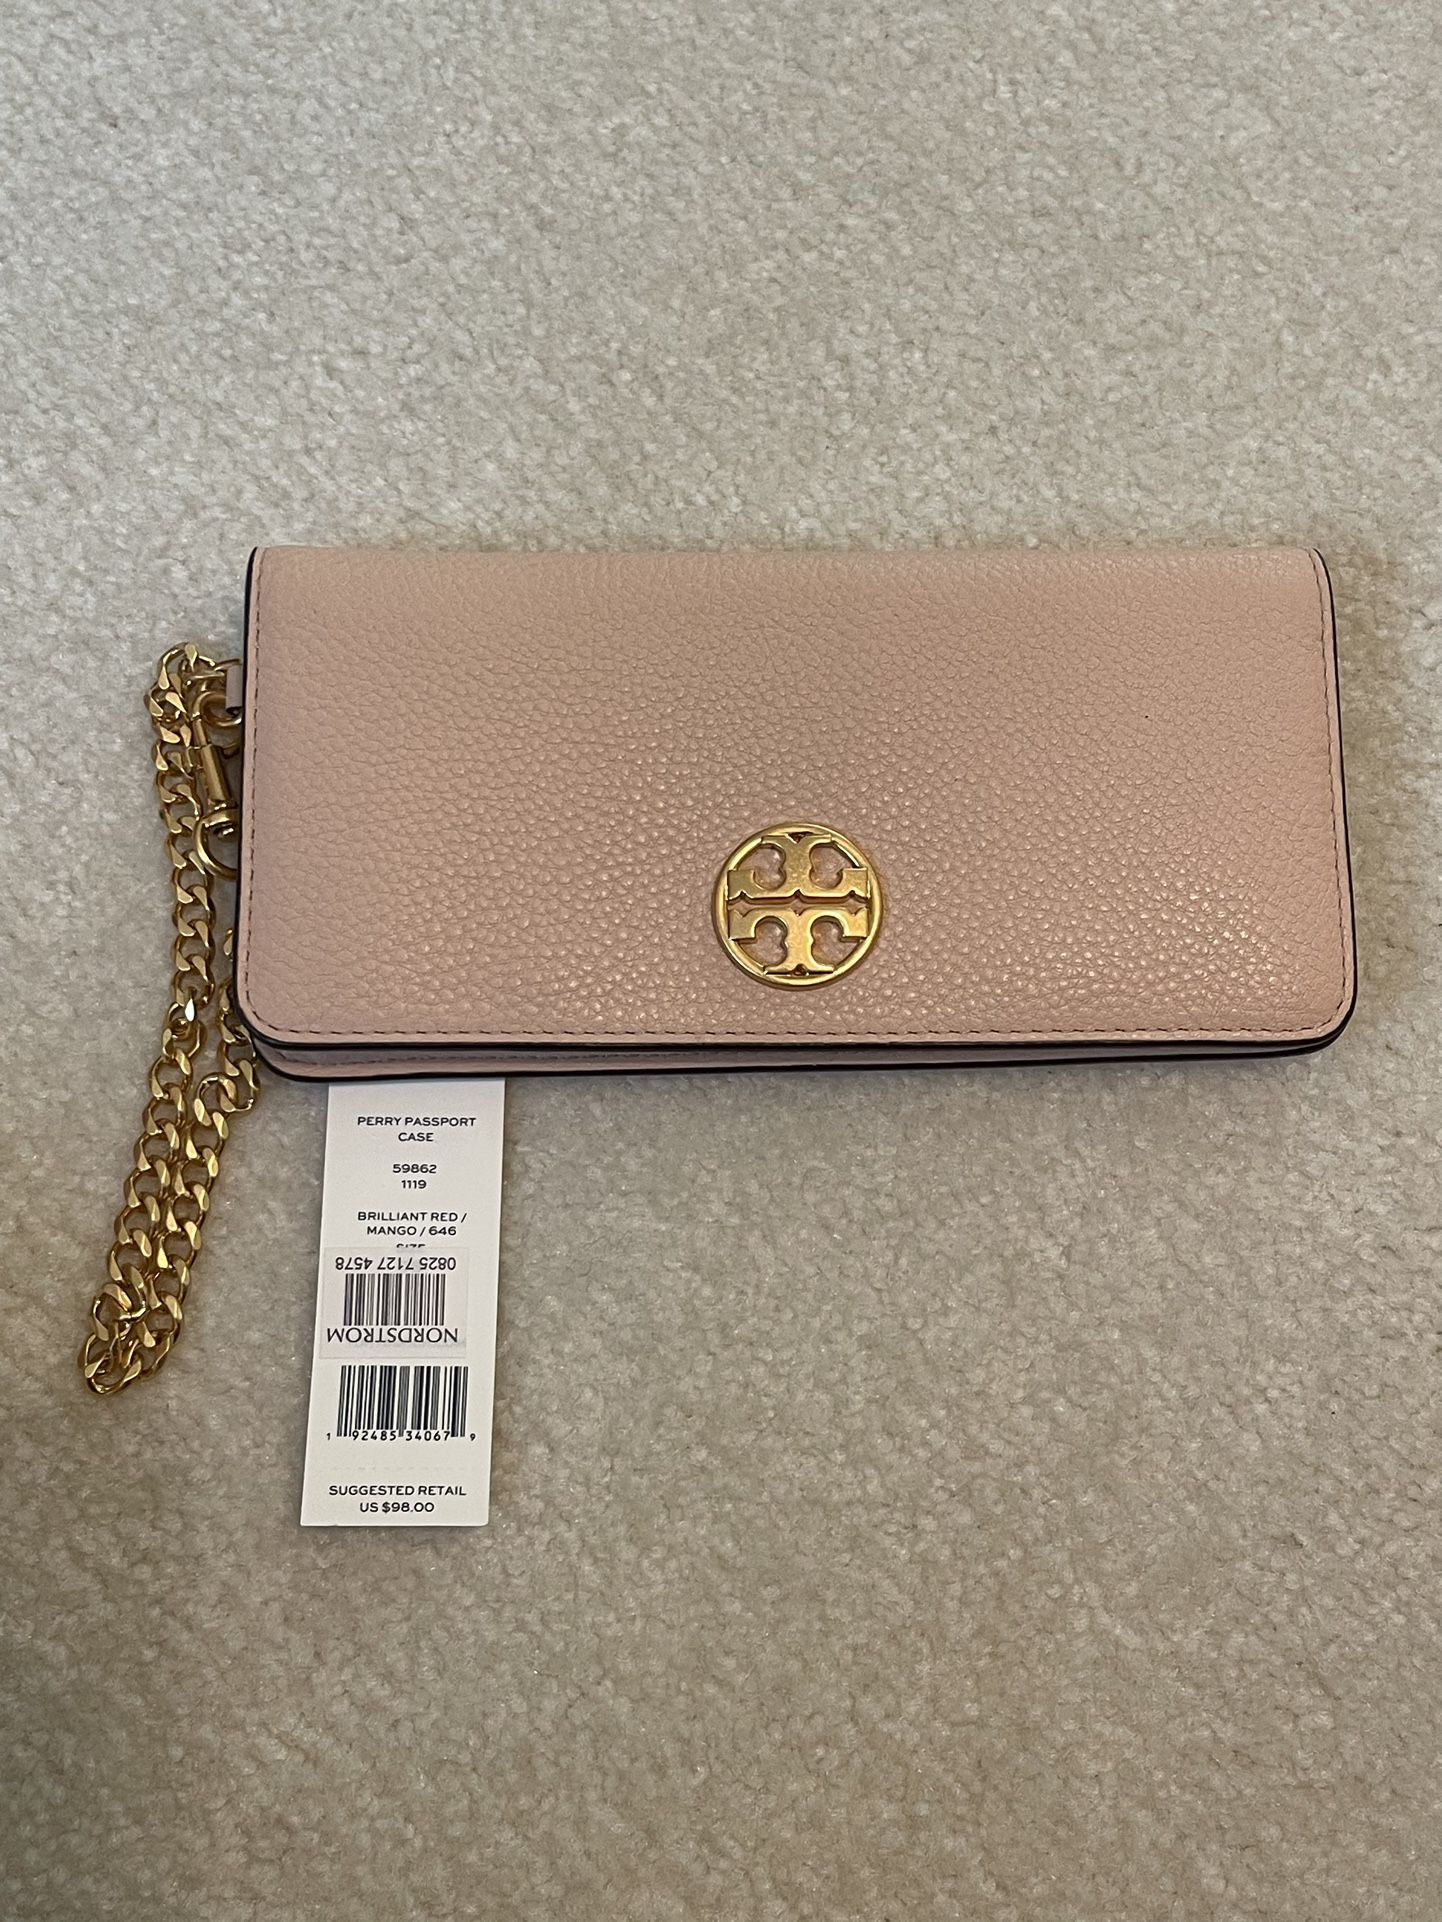 Tory Burch Chelsea Pebbled Leather Wristlet 